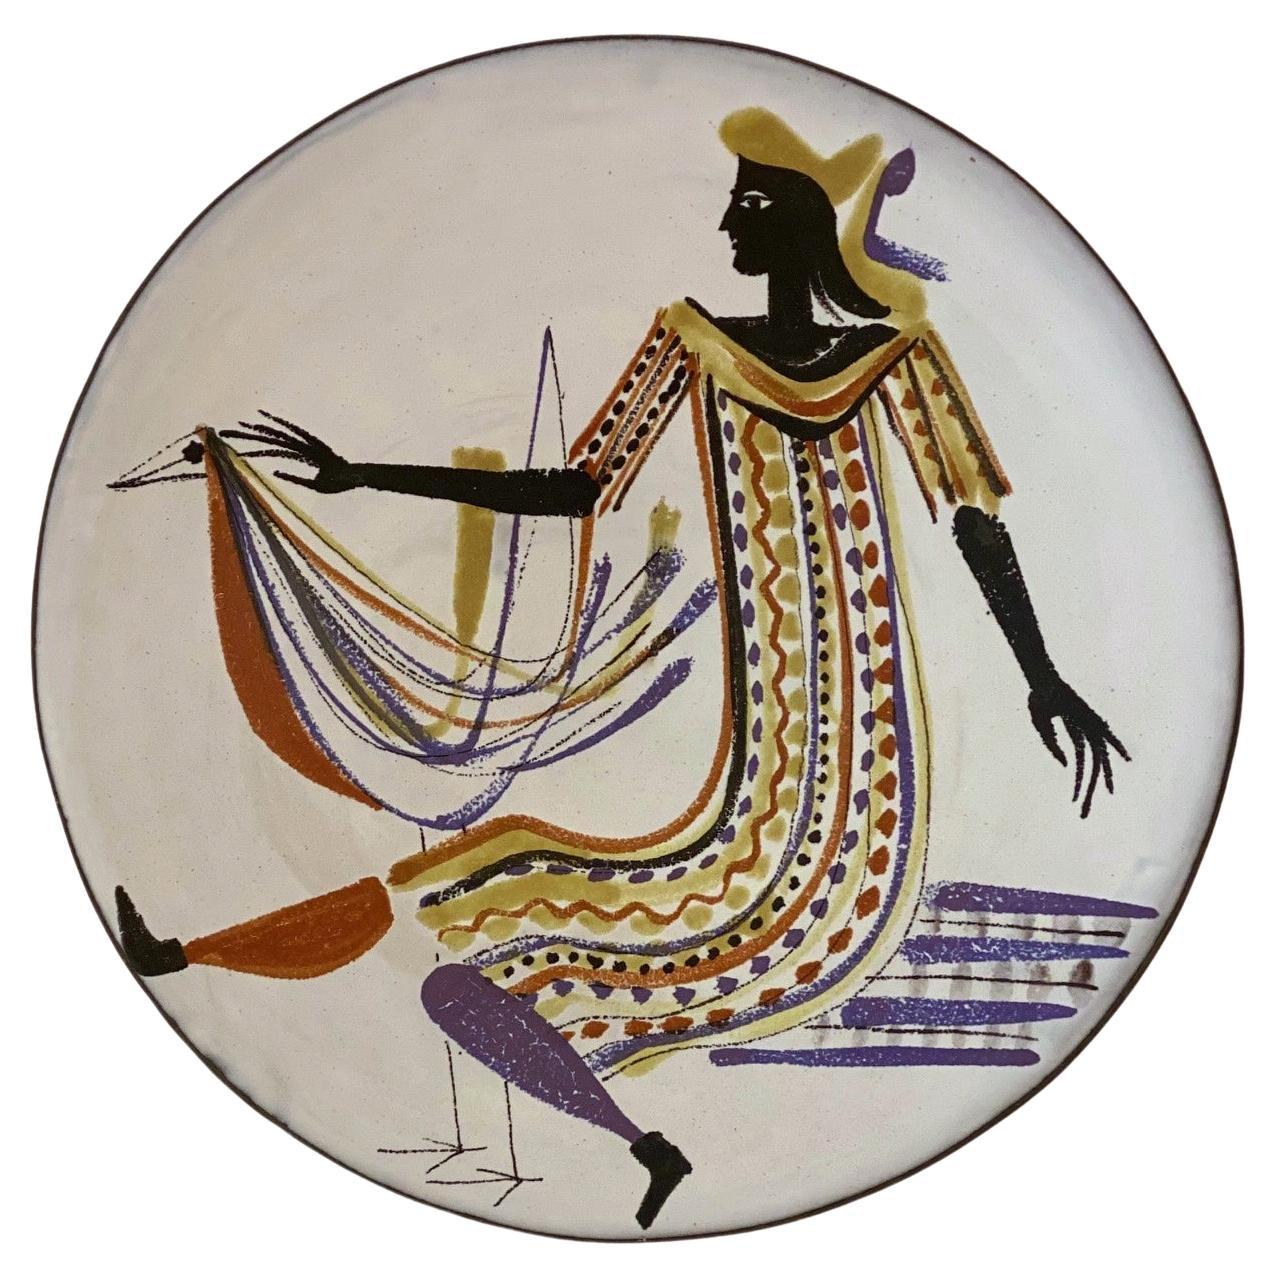 Large Ceramic Decorative Dish "Woman & Bird" Signed by Roger Capron, 1955 For Sale